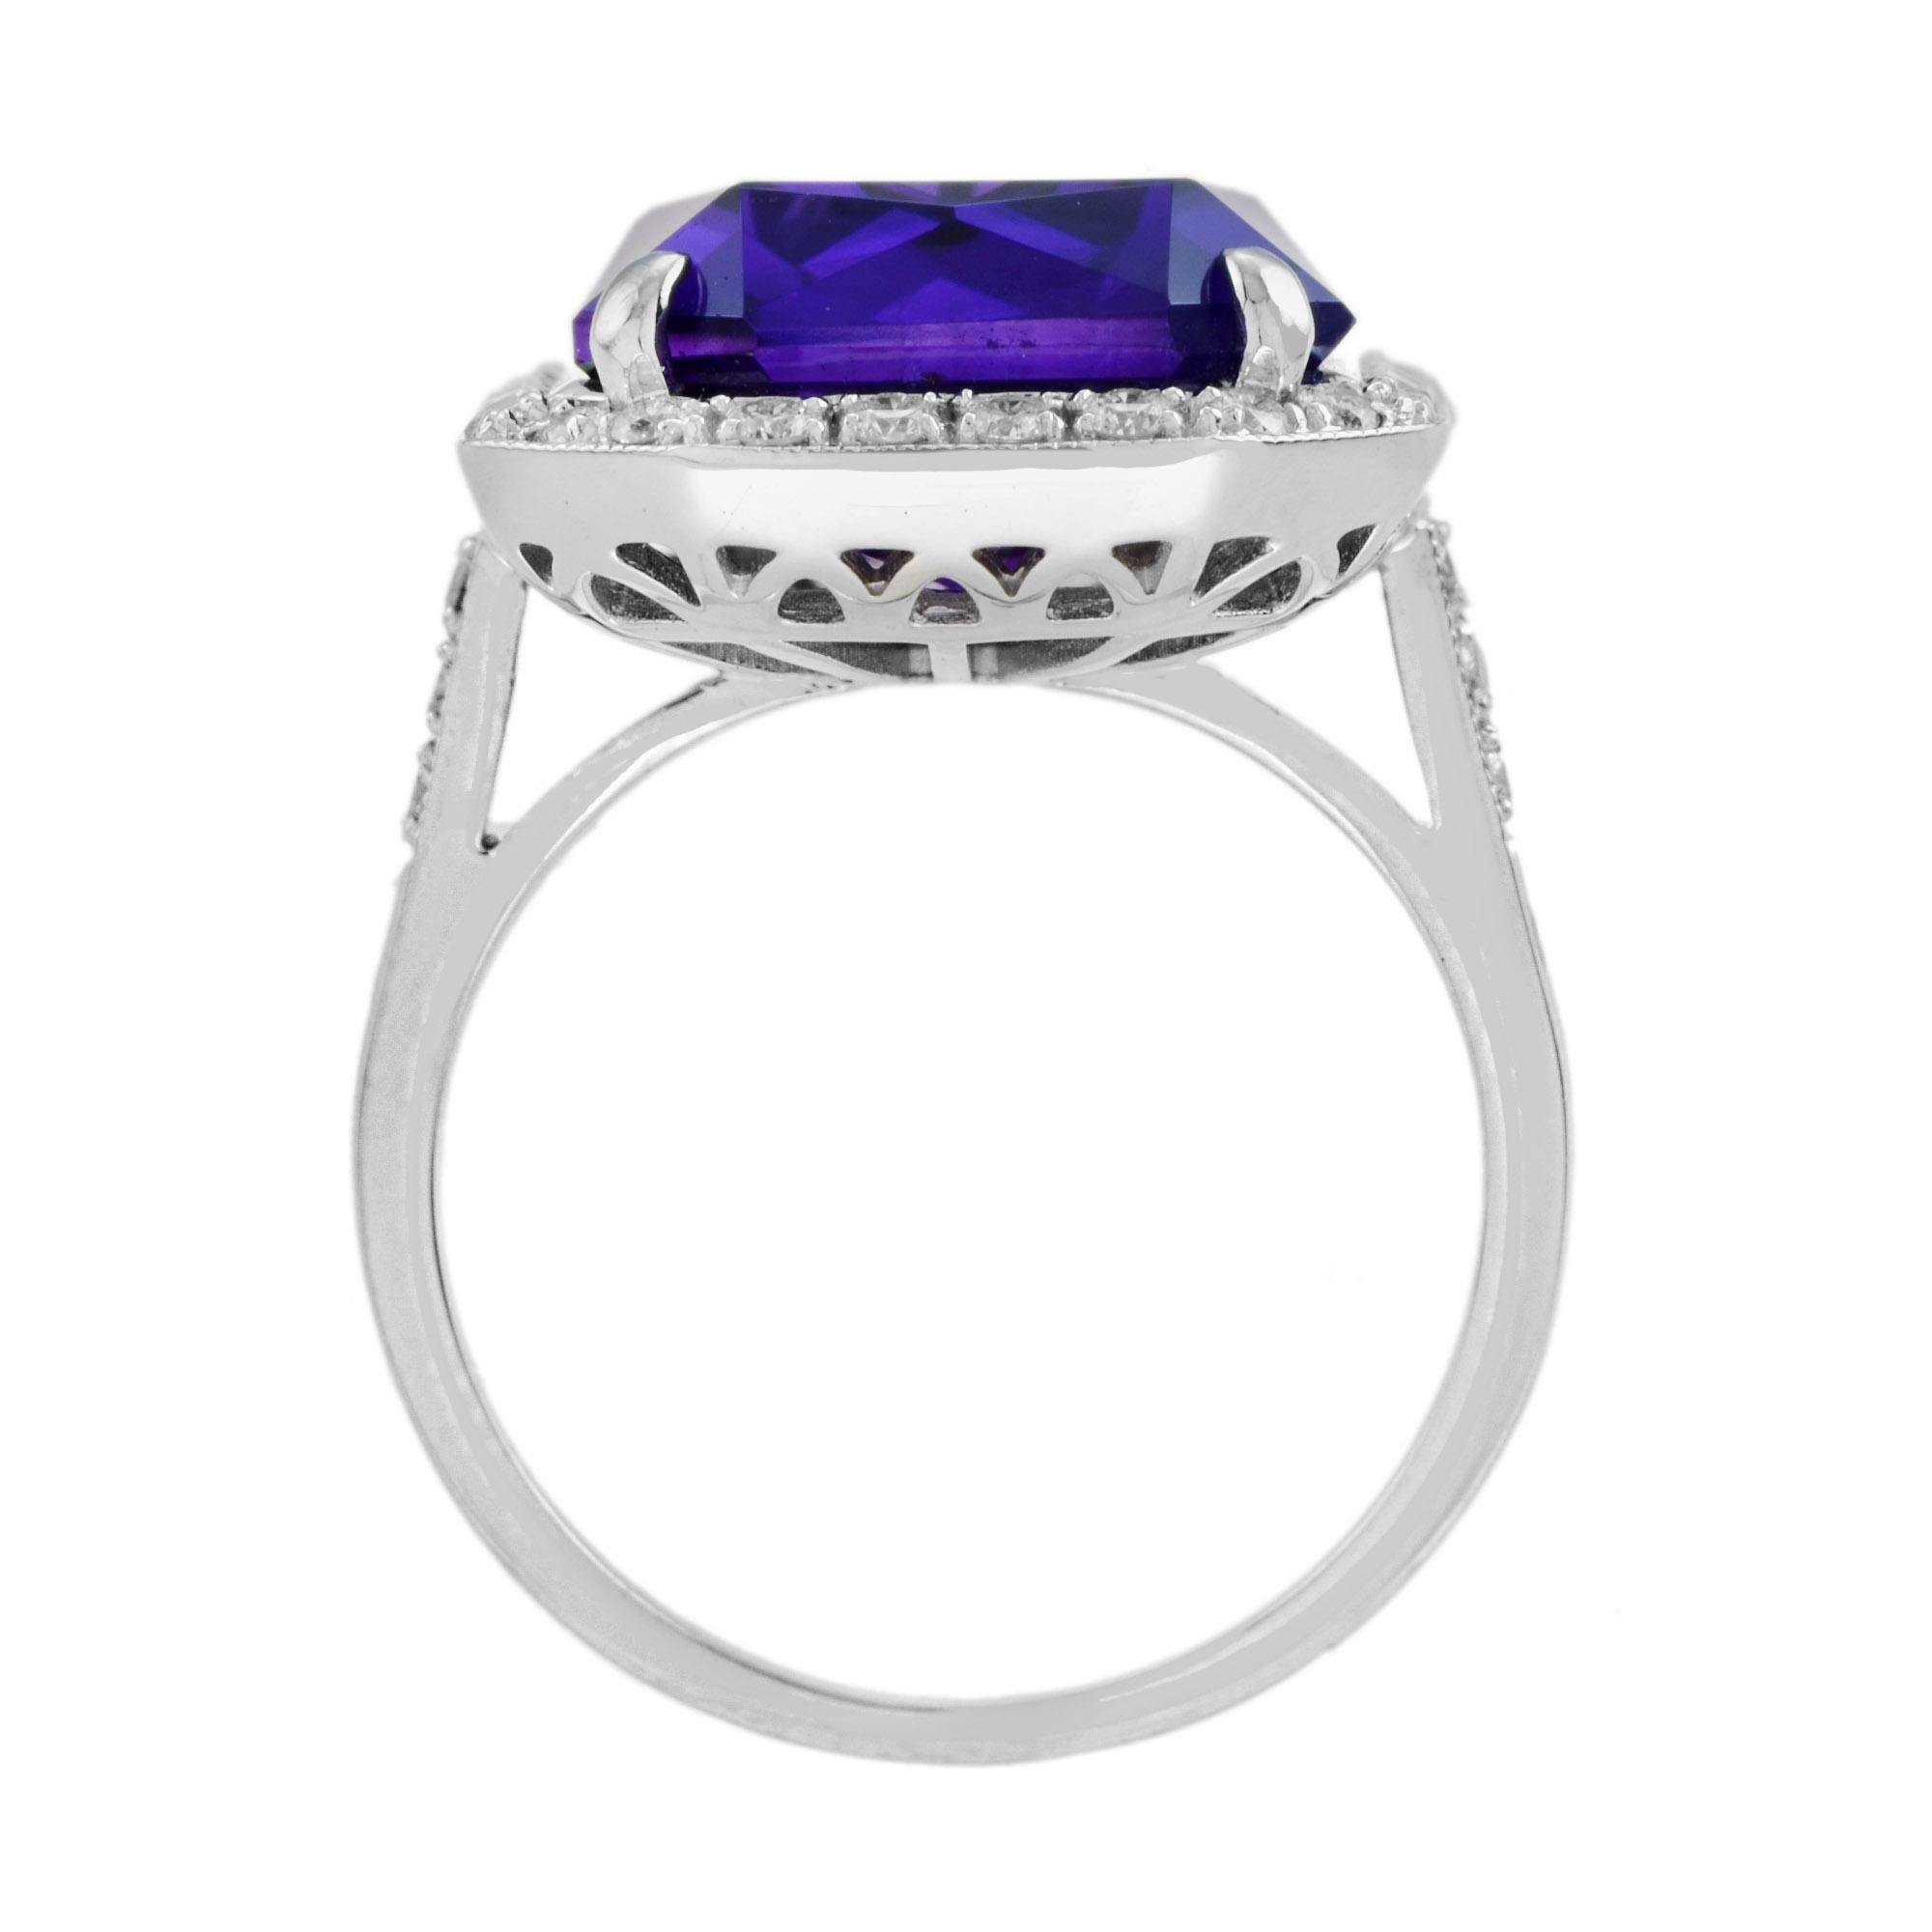 Certified 11.75 Ct. Amethyst and Diamond Halo Art Deco Style Ring in 14K Gold 2